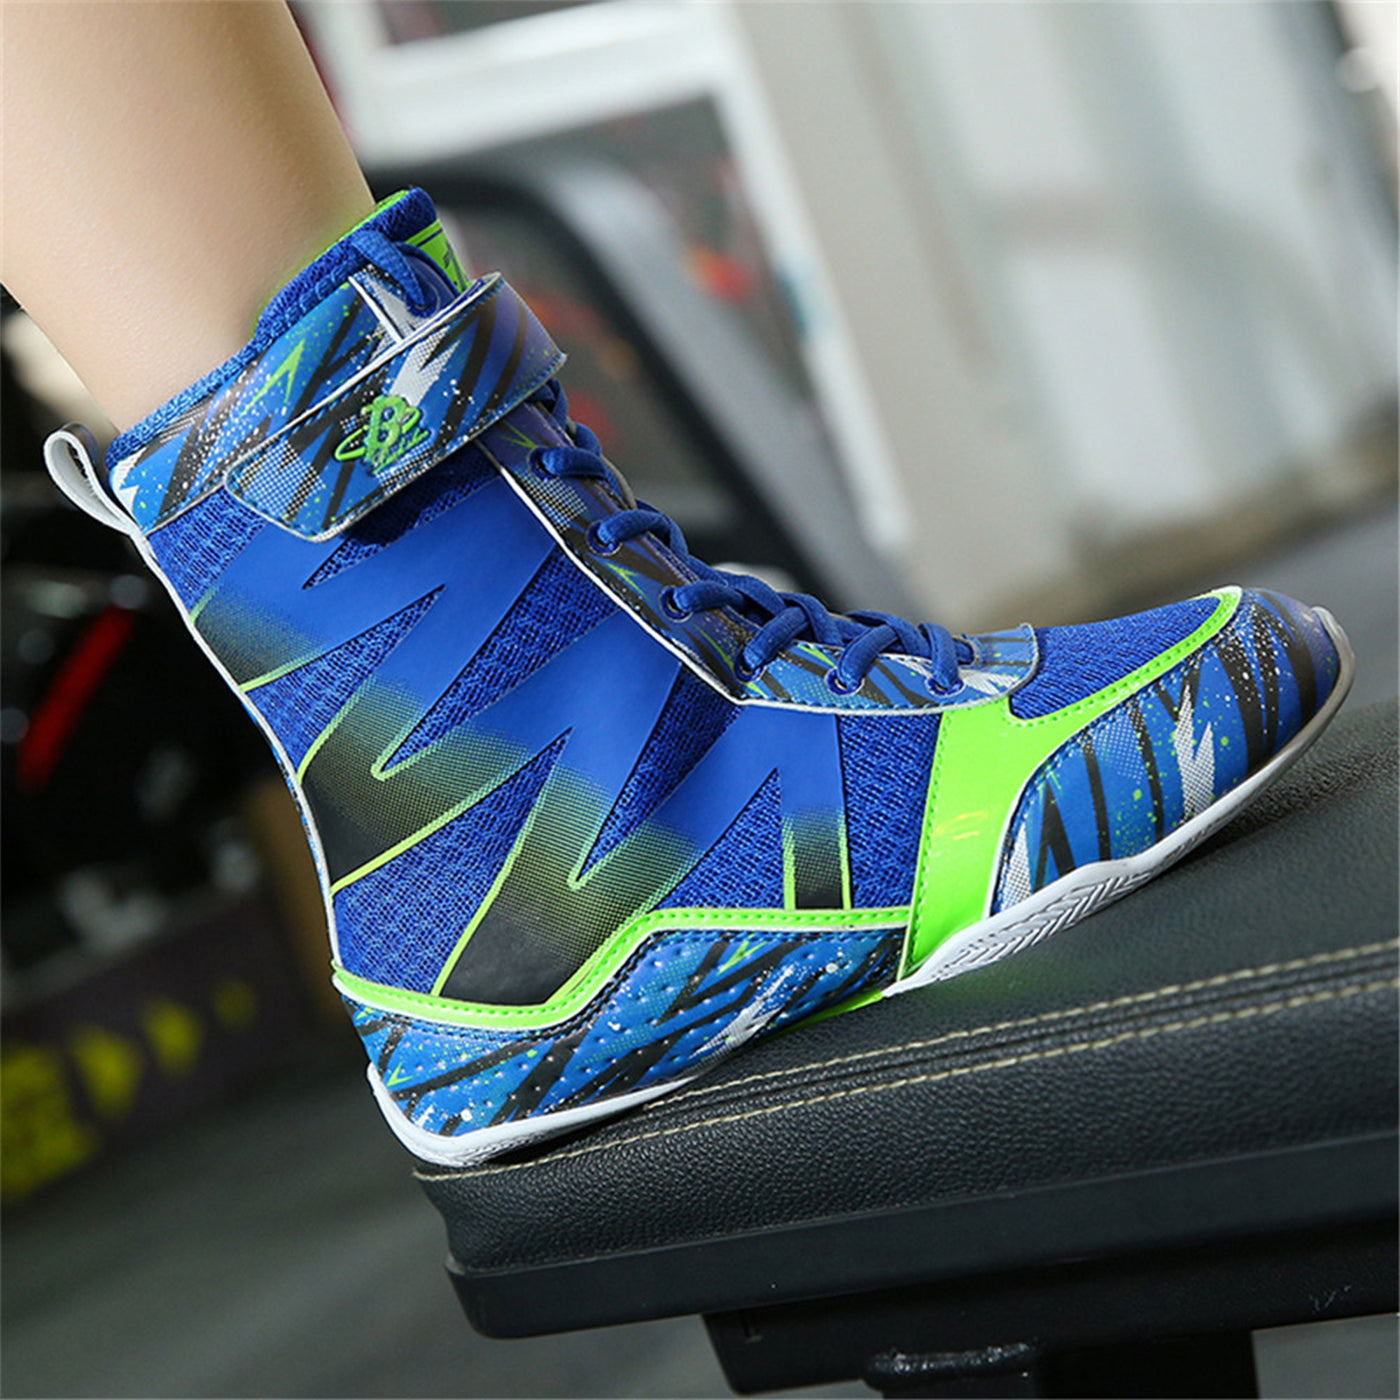 B LUCK SHOE Boxing Shoes for Kids, Youth Boxing Boots Hi-top Breathable Wrestling Shoes LS-218 BLUE